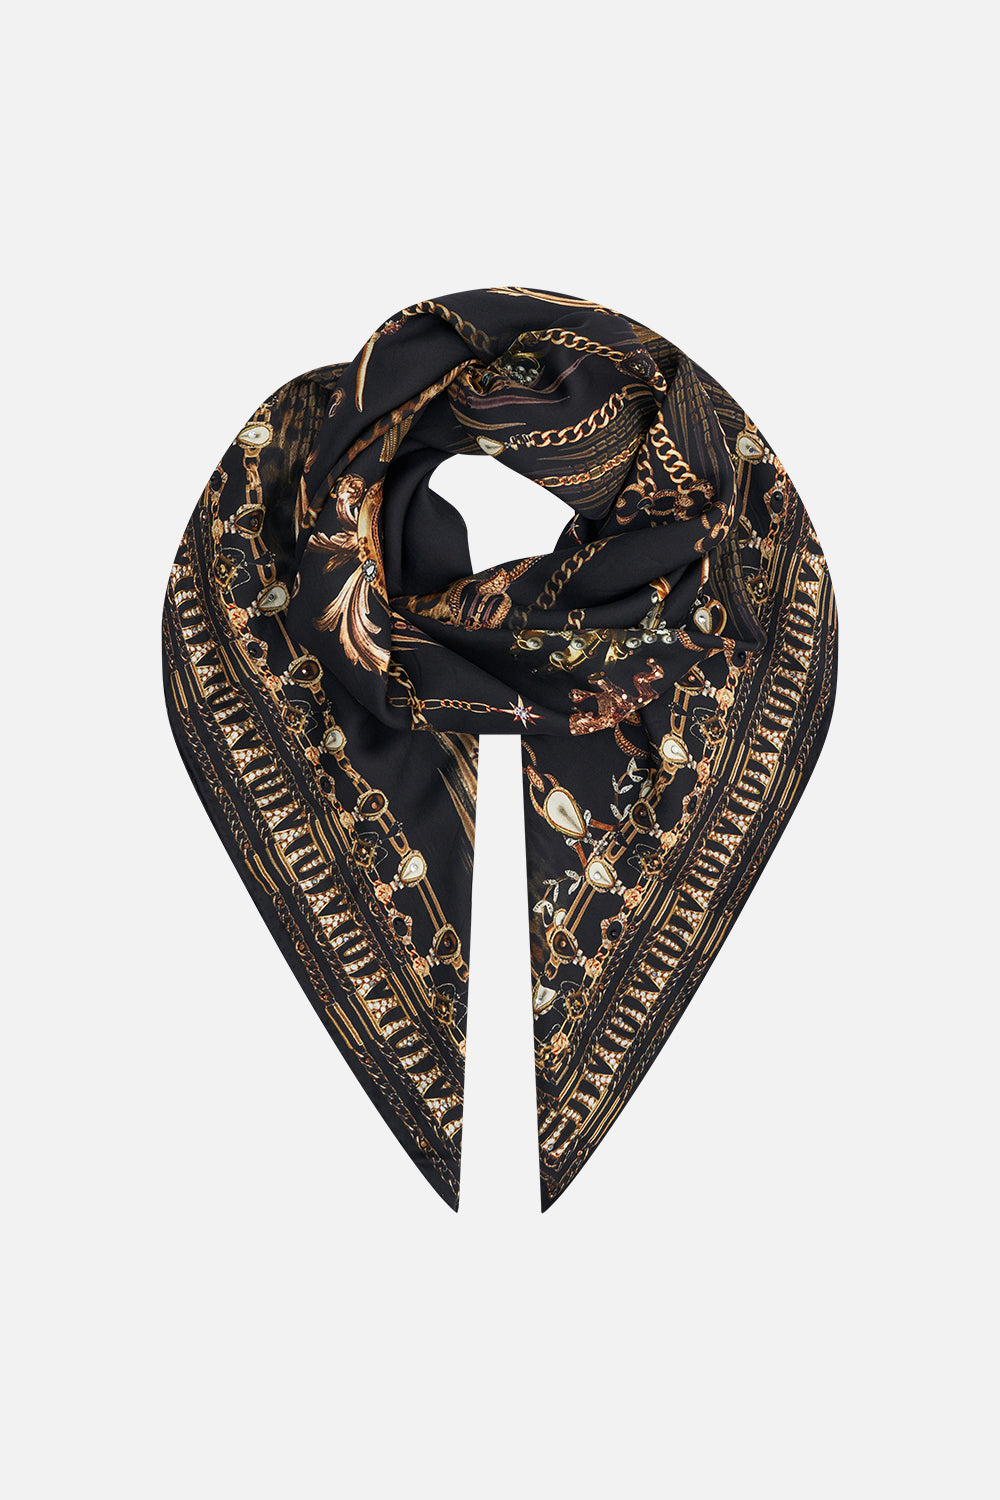 Product view of CAMILLA silk square scarf in Jungle Dreaming animal print 